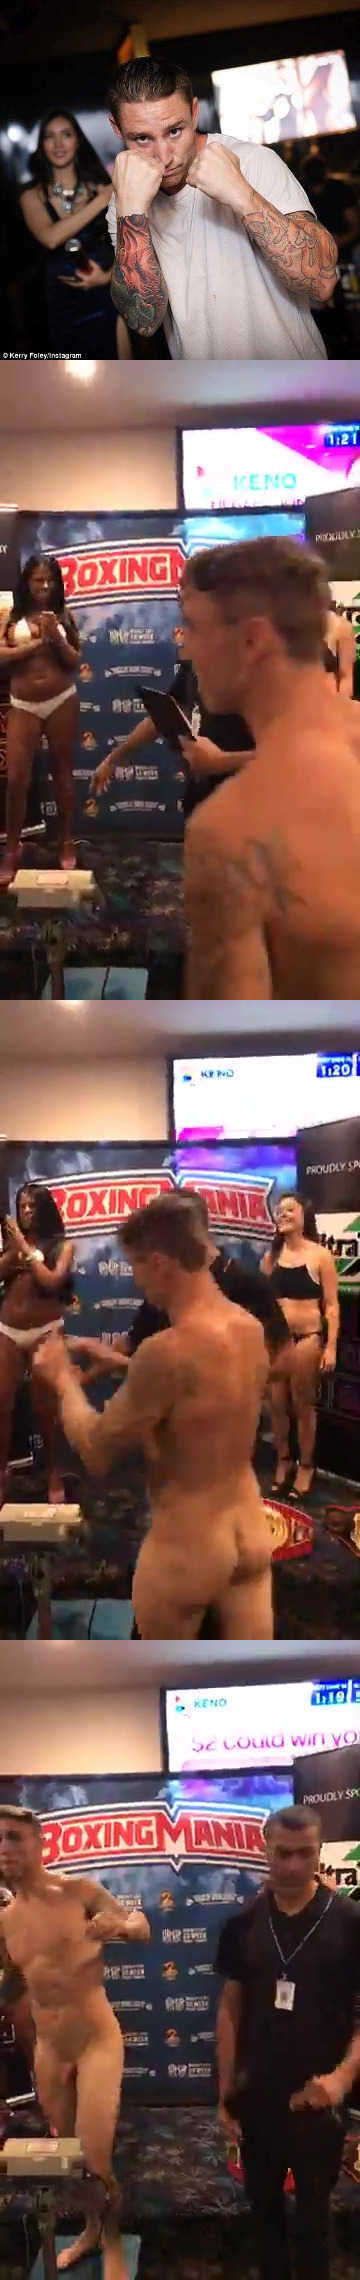 kerry foley full frontal naked weigh in